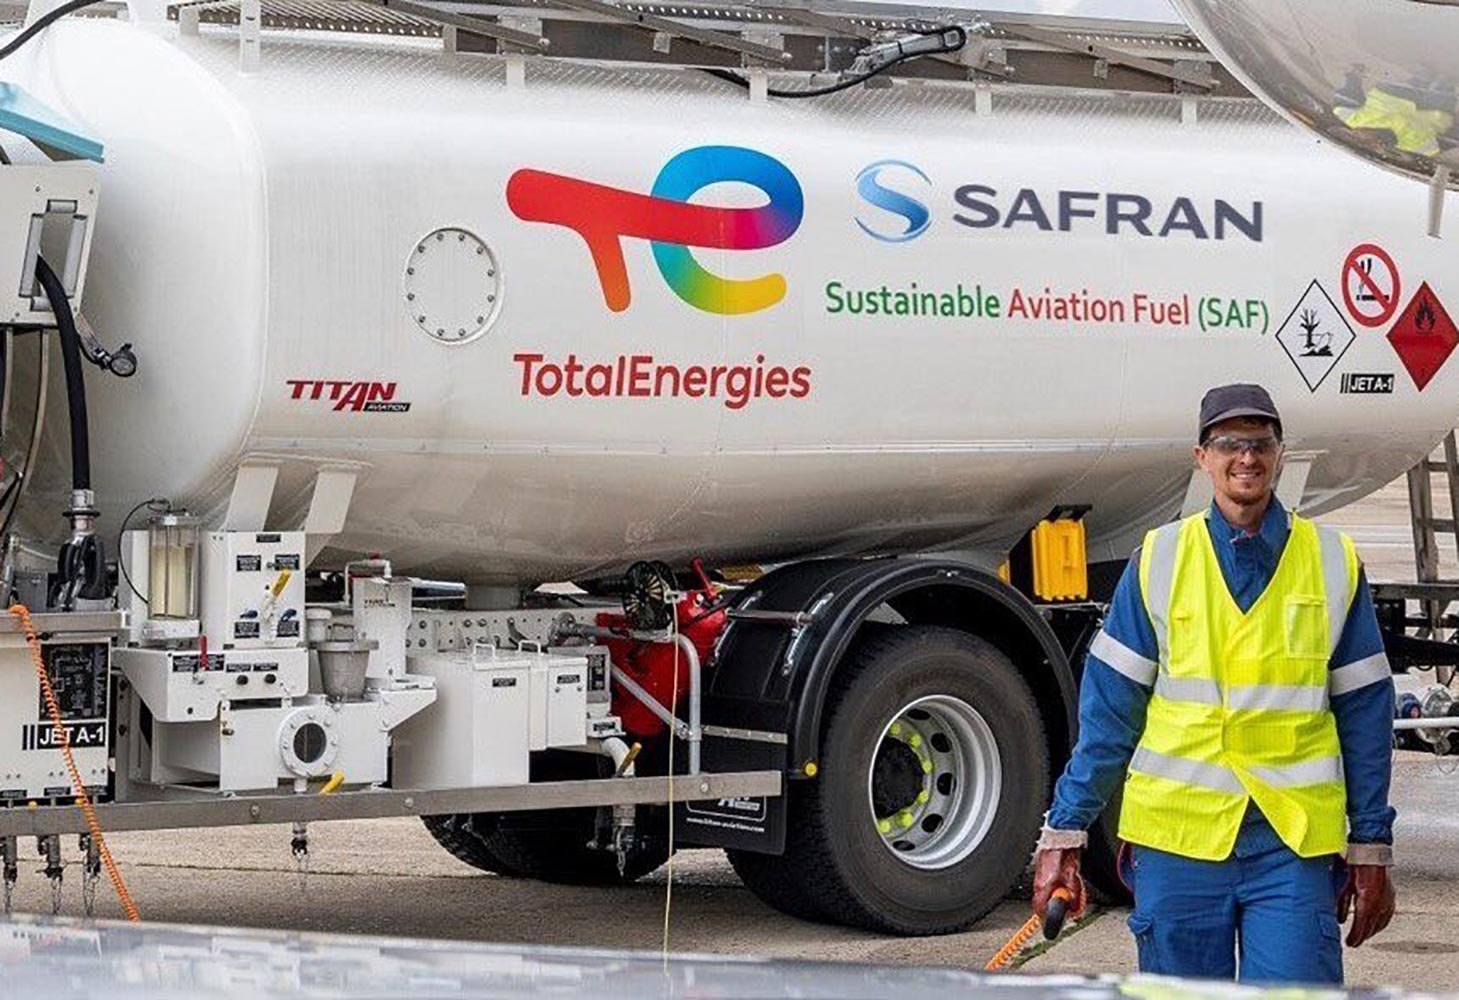 Safran and TotalEnergies to develop sustainable aviation fuel